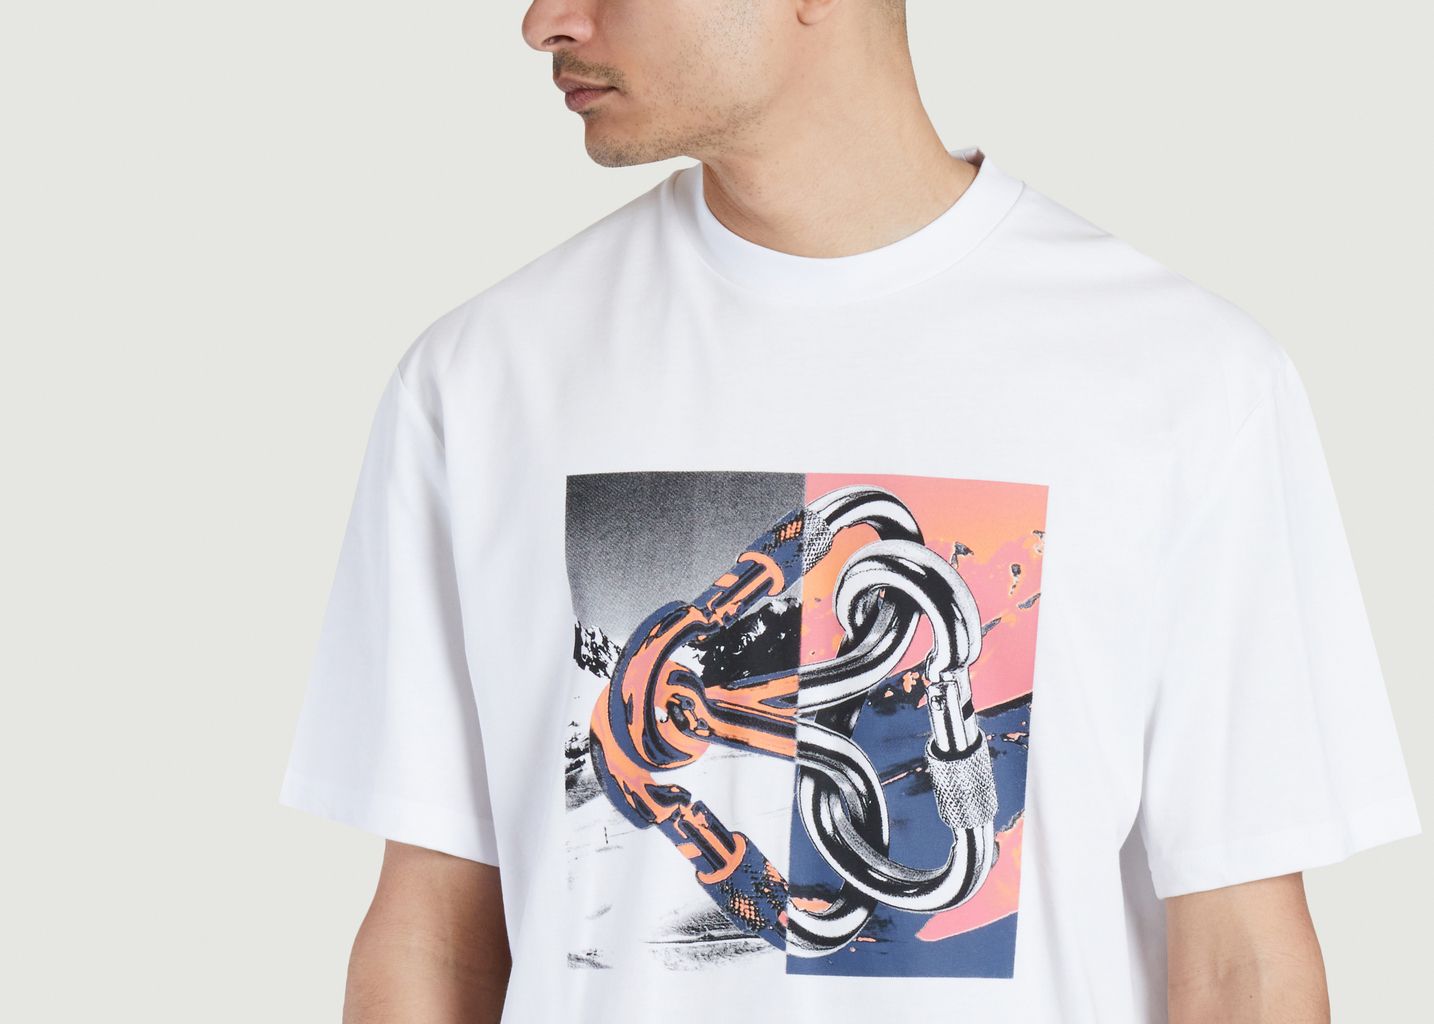 Graphic T-shirt  - The North Face